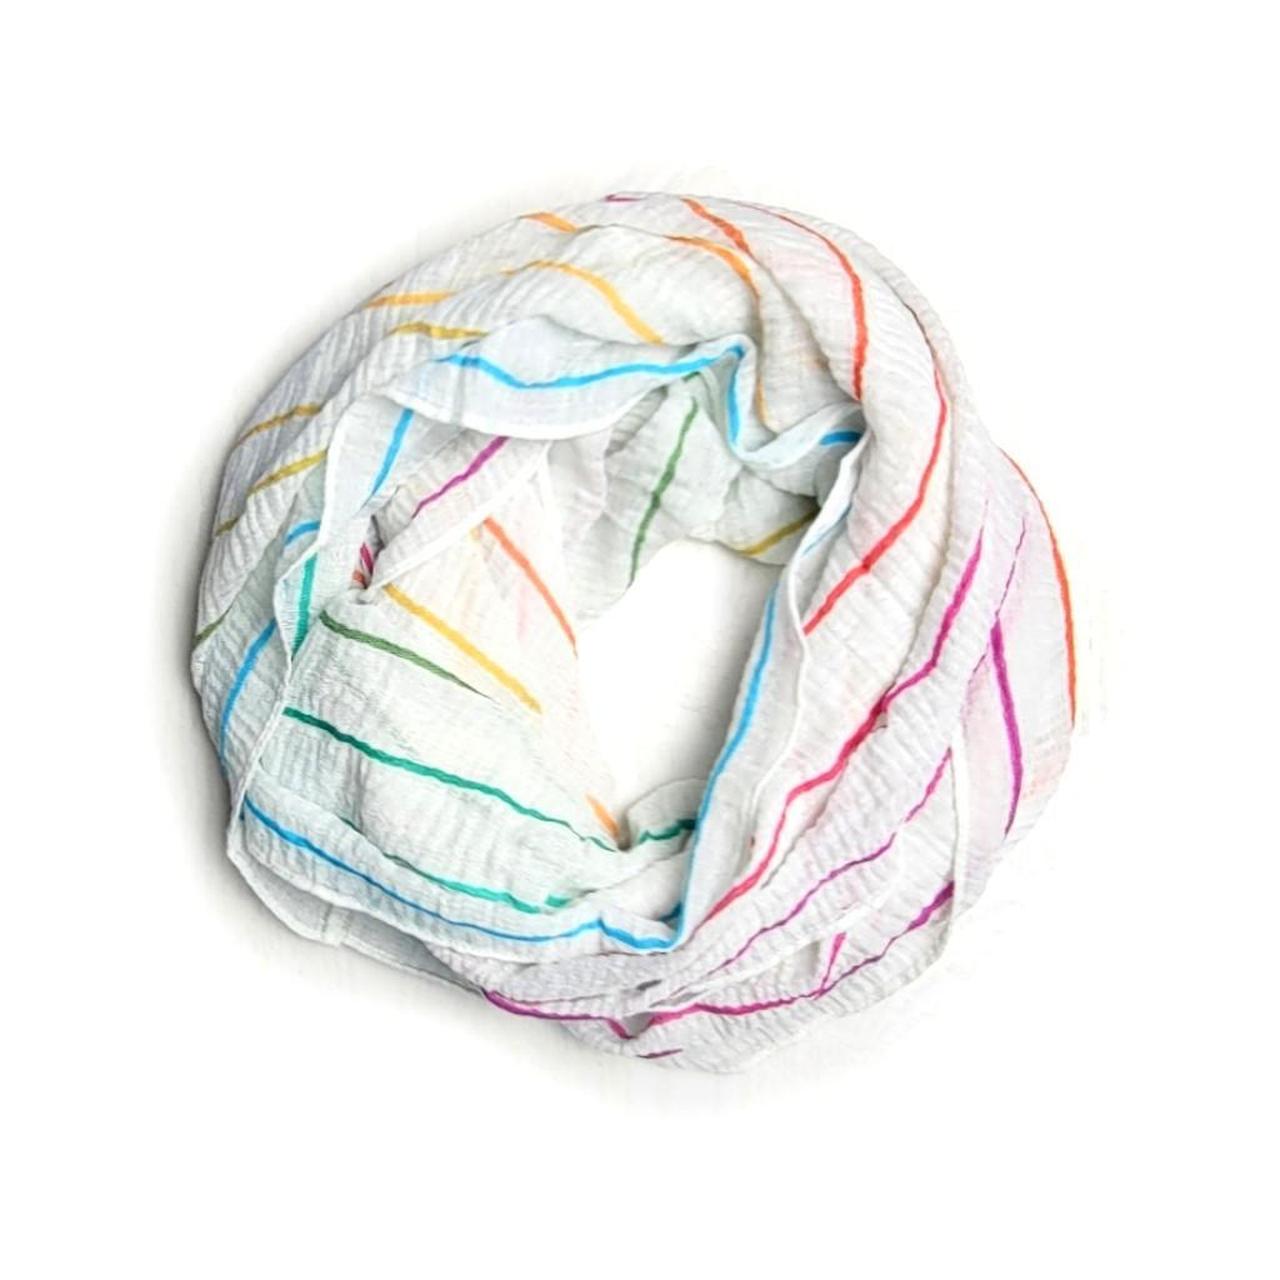 Product Image 1 - Rainbow striped infinity scarf

White and